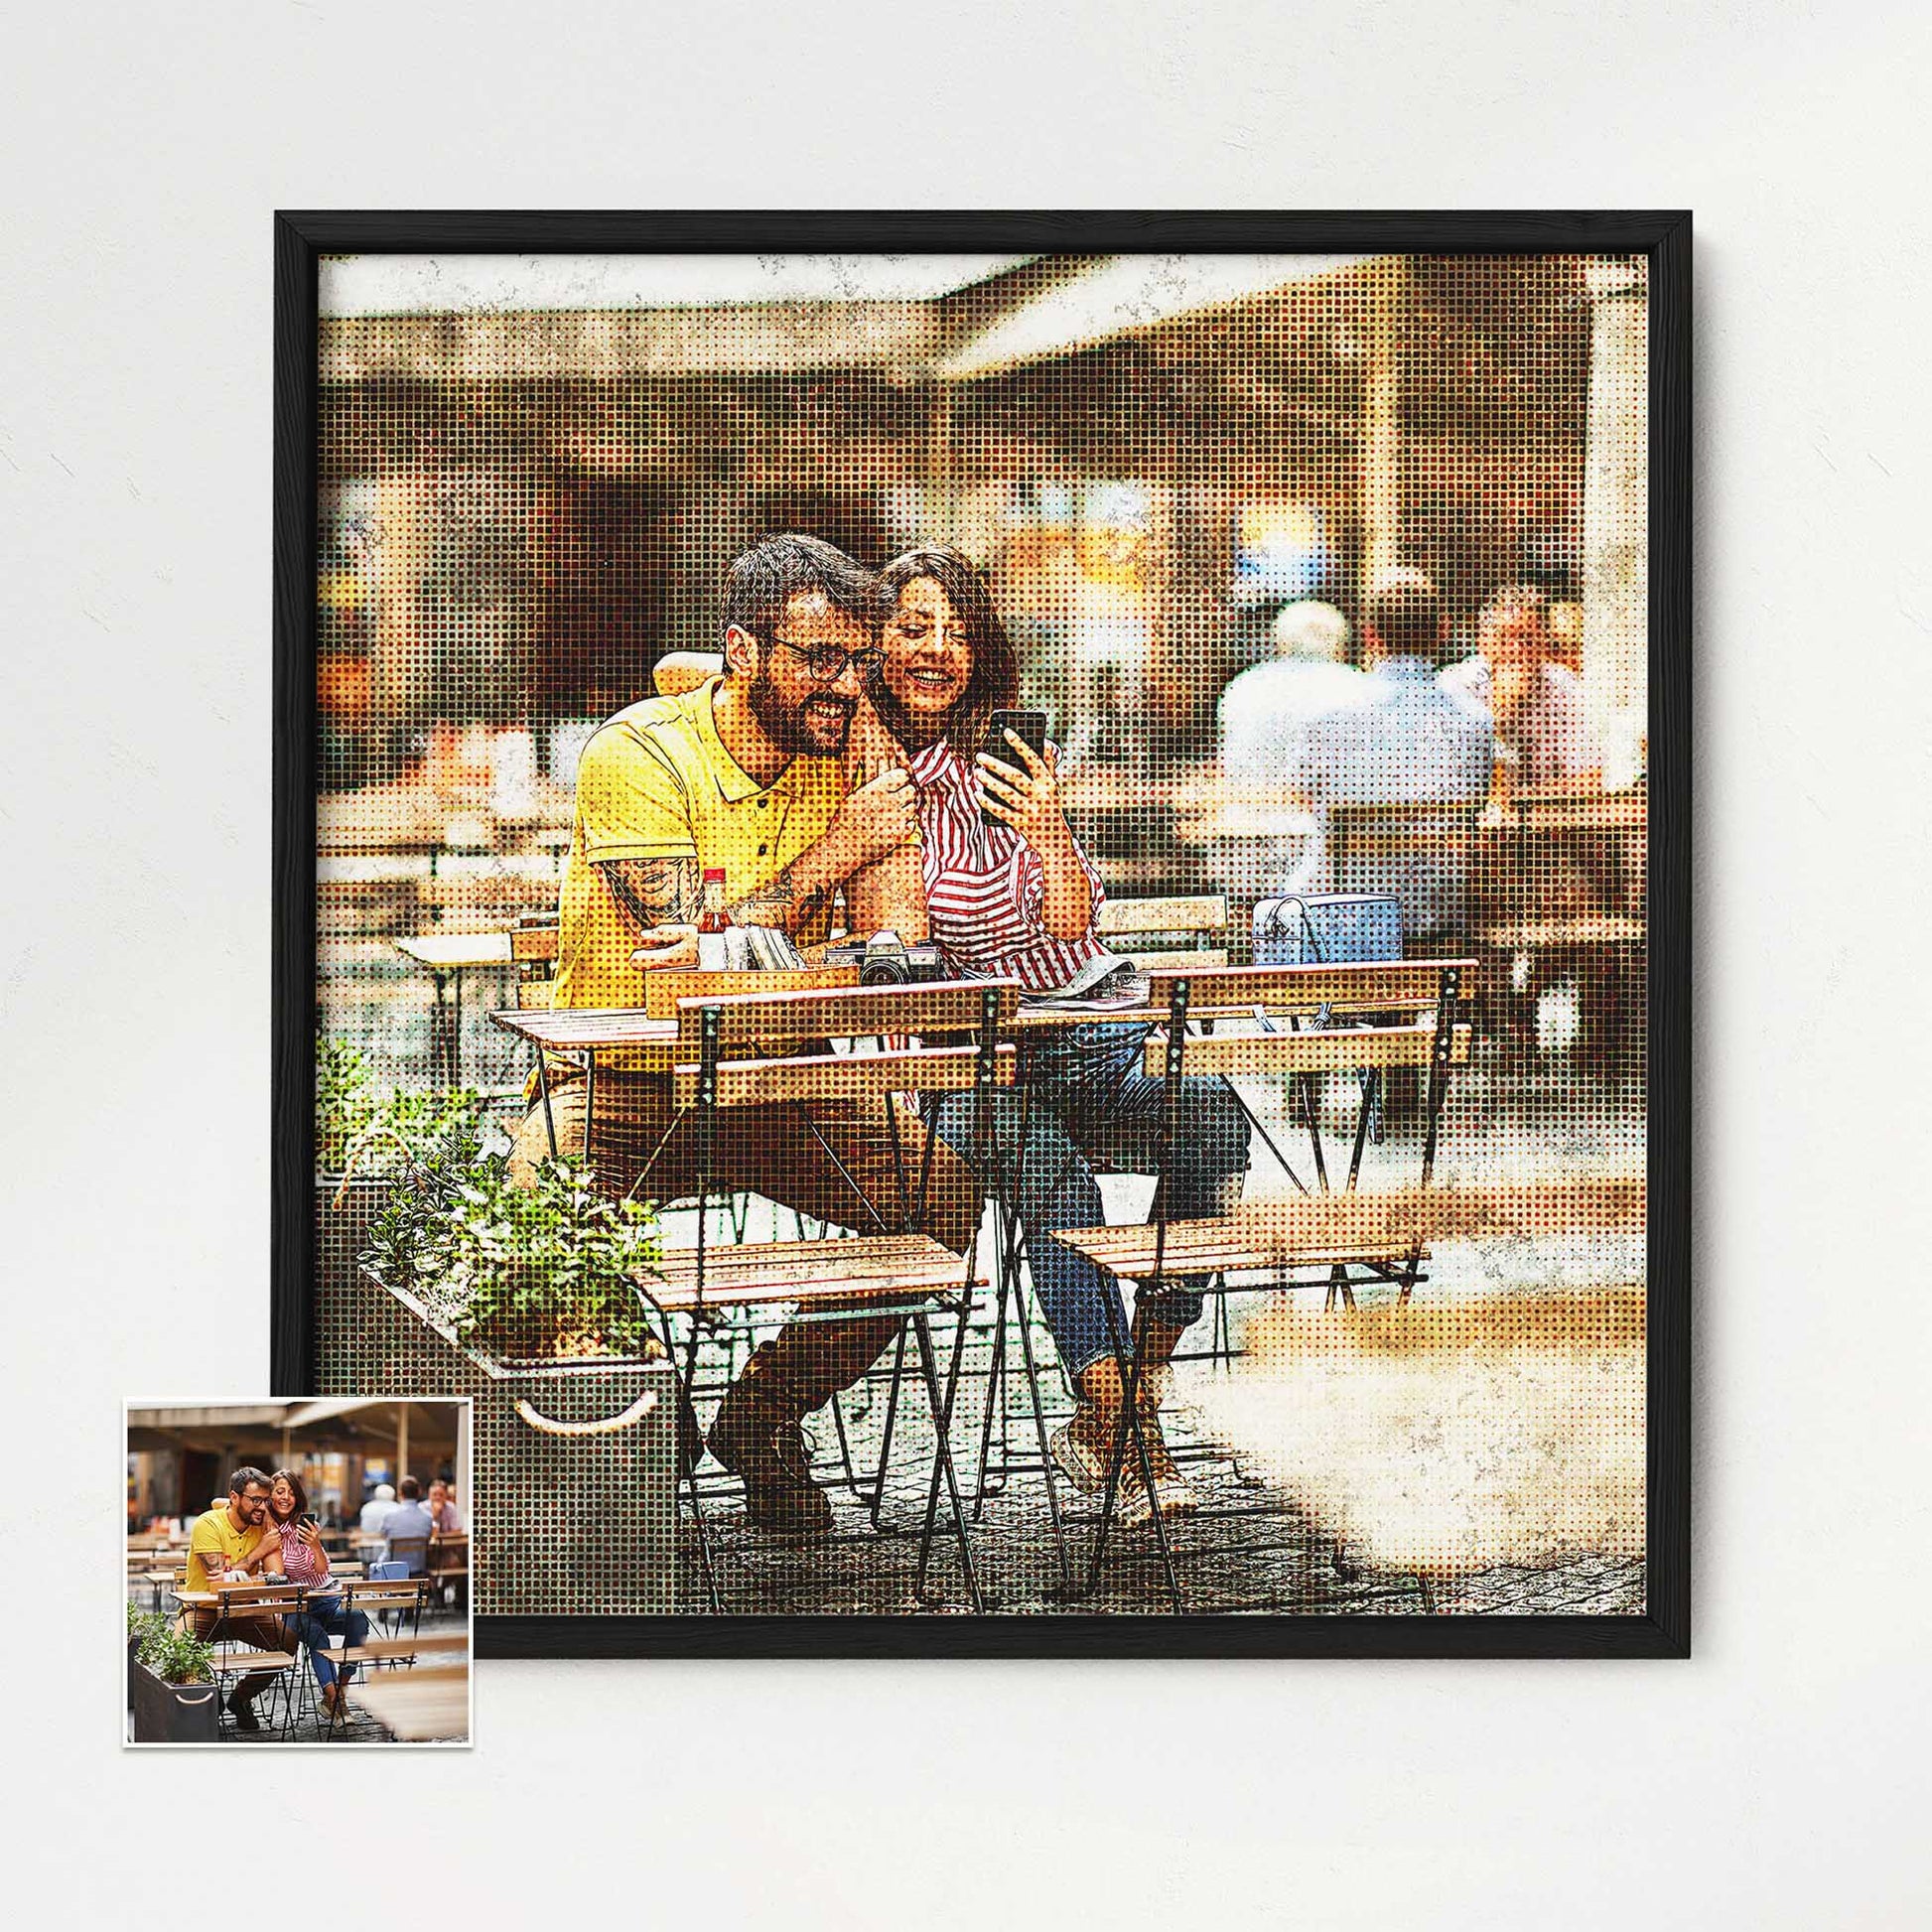 Elevate your home decor with the Personalised Grunge FX Framed Print, a captivating artwork created through painting from photo. Its grunge style and halftone effect exude a retro, old-school coolness, while the gallery-quality paper